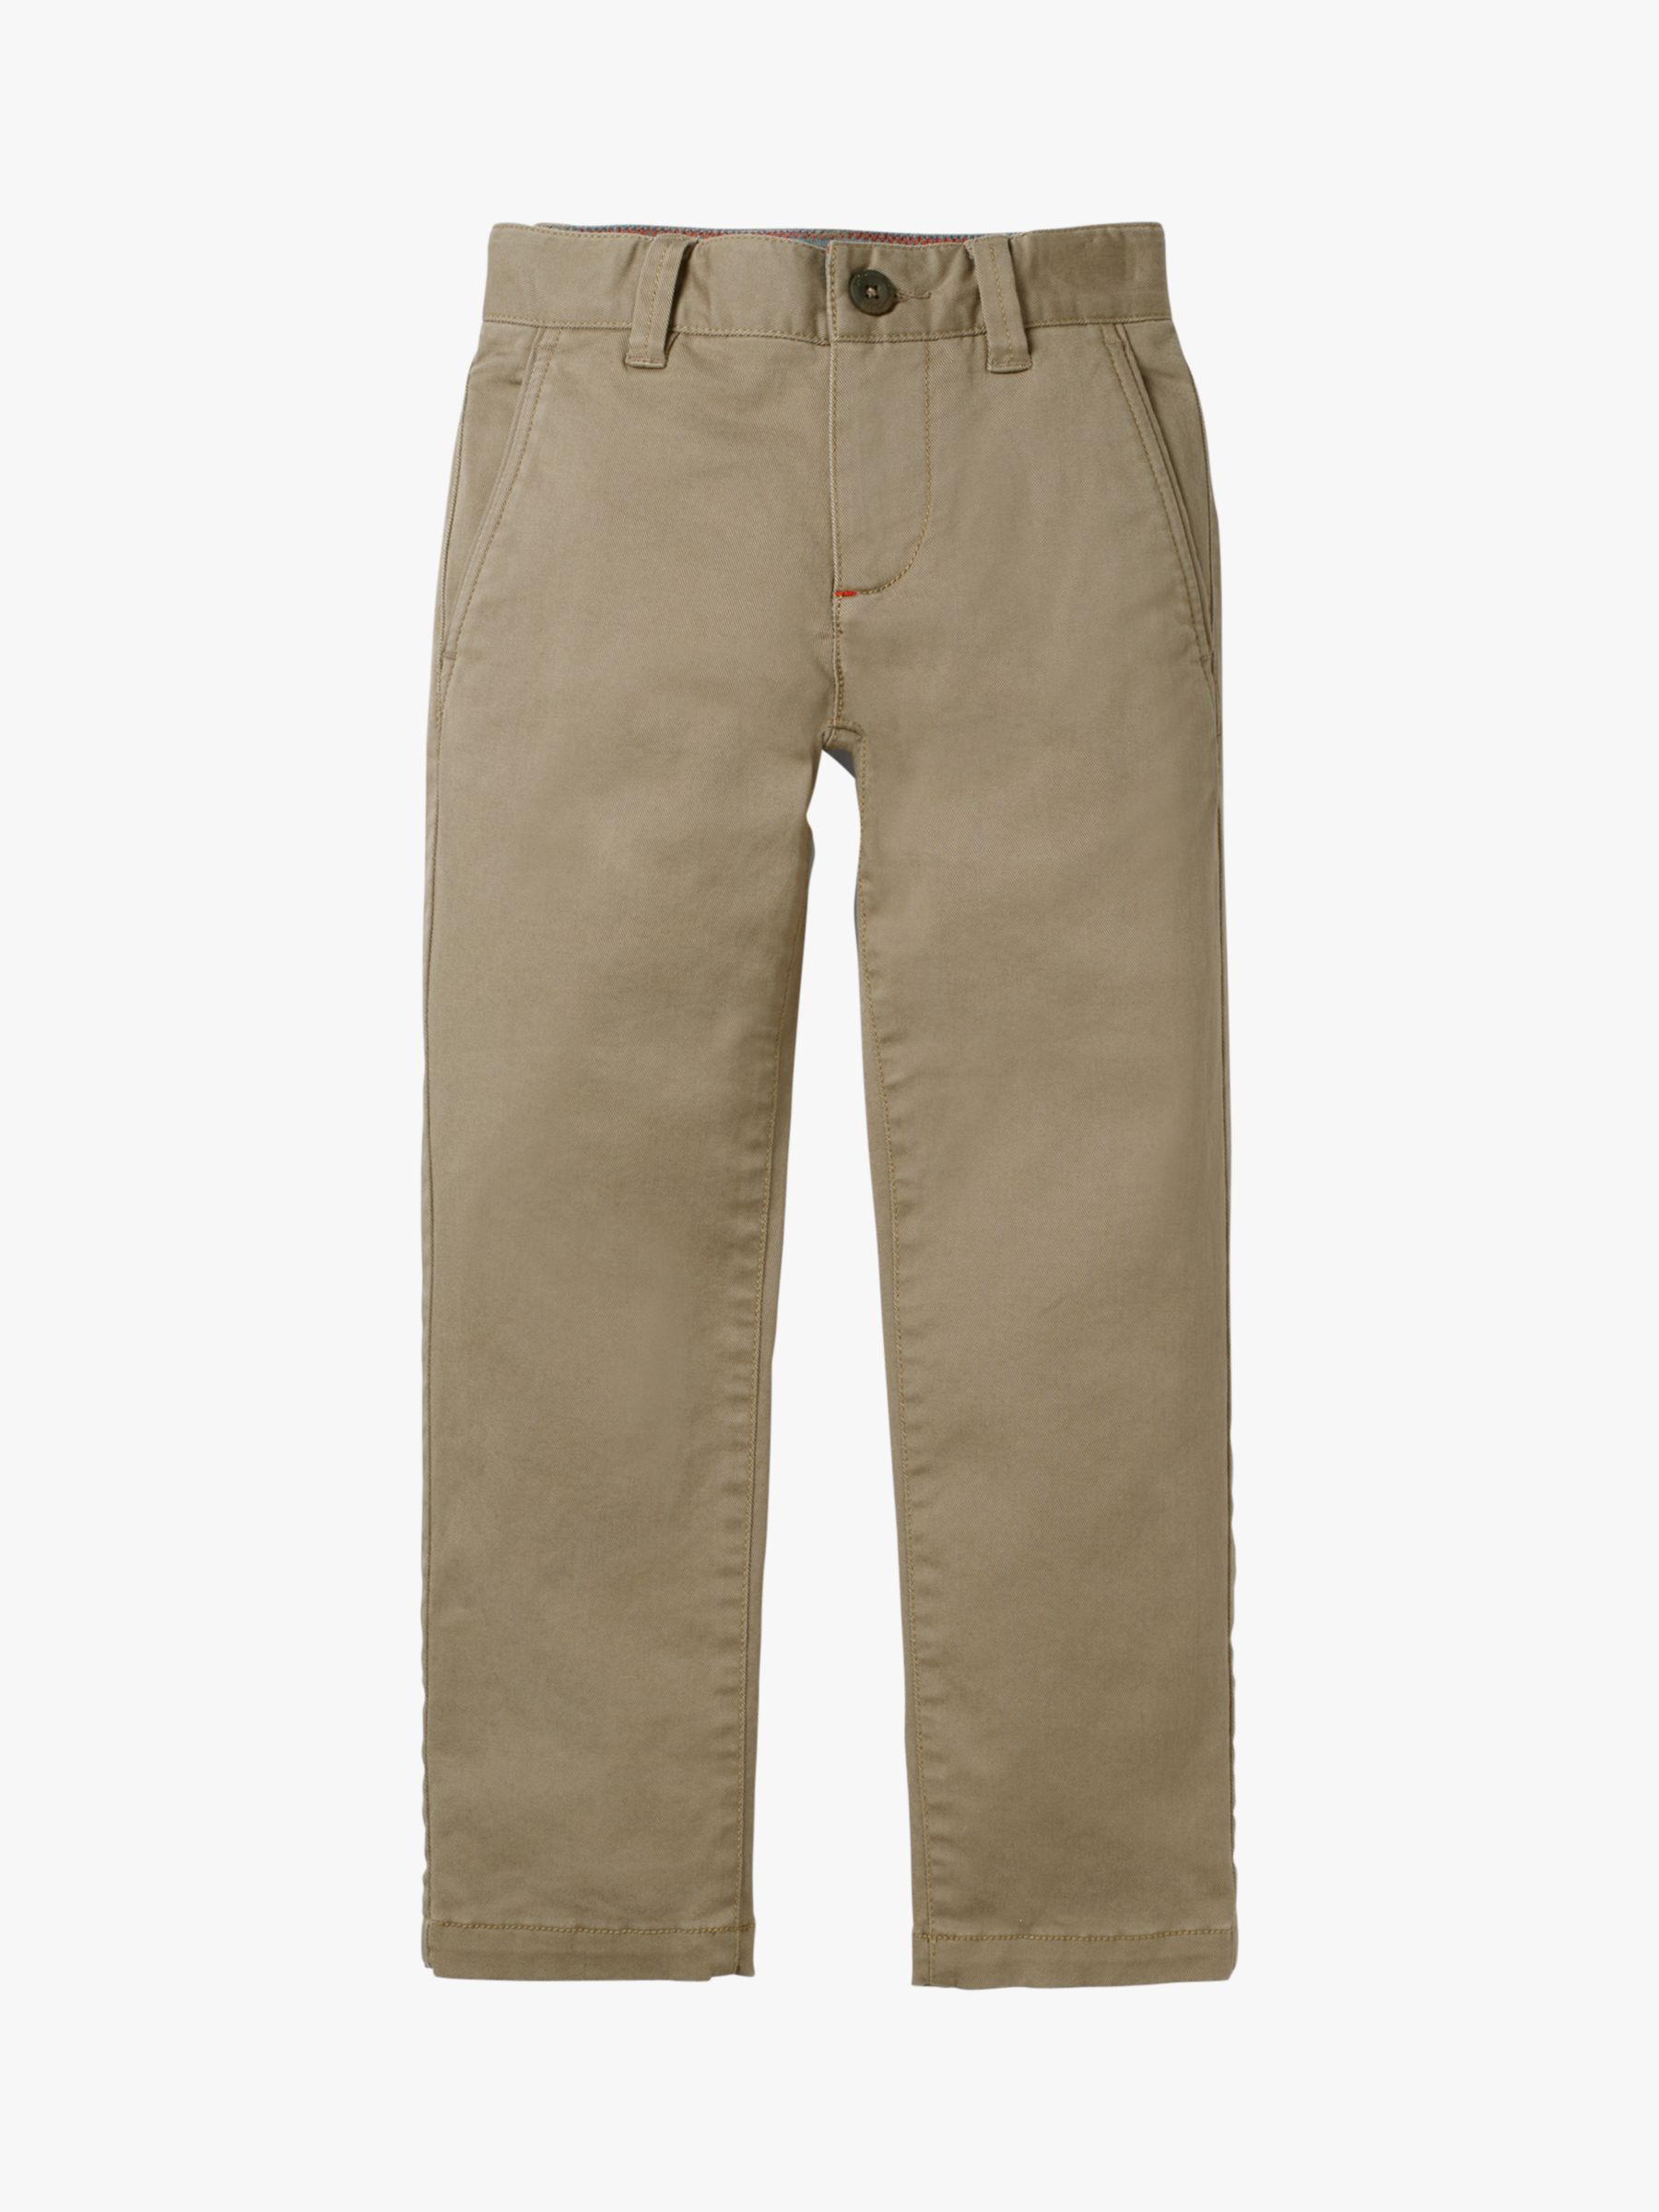 Image of Mini Boden Boys Chino Trousers Nutty Brown